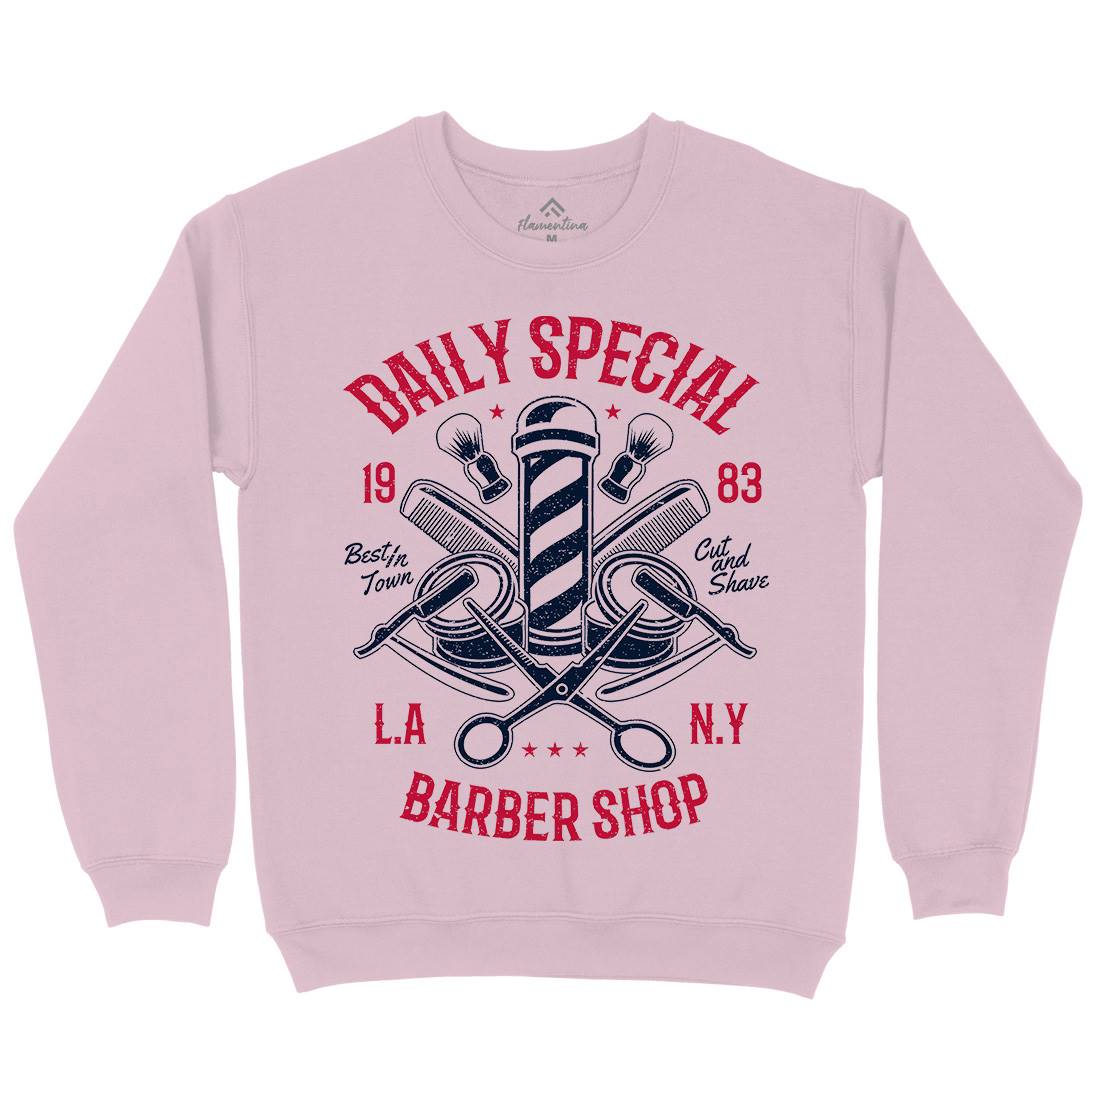 Daily Special Shop Kids Crew Neck Sweatshirt Barber A041